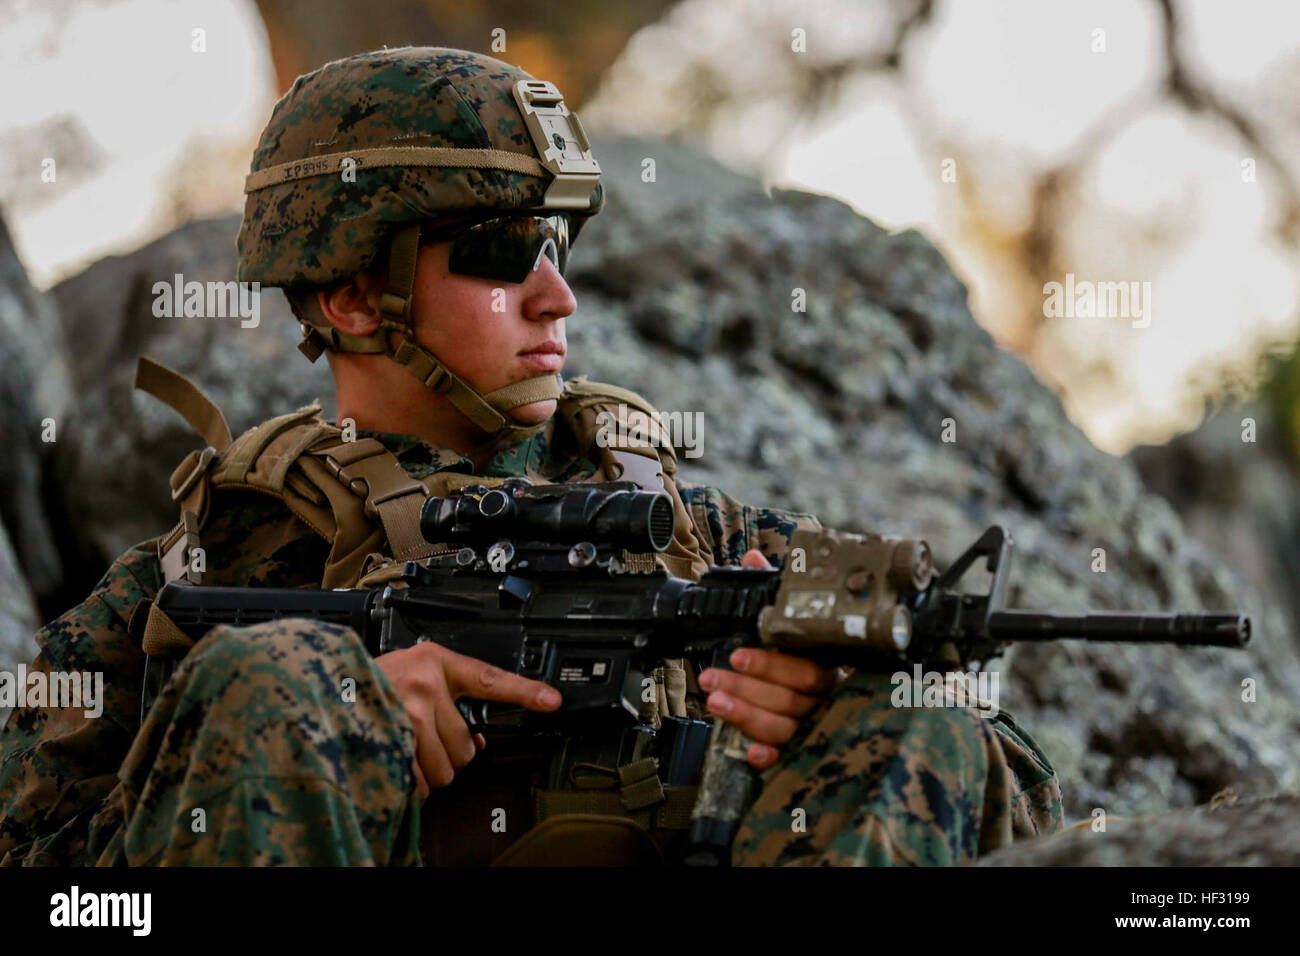 U.S. Marine Cpl. Trevor Perdue provides security during Amphibious Squadron/Marine Expeditionary Unit Integration Training (PMINT) aboard Camp Pendleton, Calif., March 5, 2015. Perdue is a team leader with Battalion Landing Team 3rd Battalion, 1st Marine Division, 15th Marine Expeditionary Unit.  The Marines of BLT 3/1 used PMINT to hone their skills in a field environment to improve their combat effectiveness as a unit.    (U.S. Marine Corps photo by Sgt. Jamean Berry/Released) 15th MEU Marines sharpen their combat skills 150305-M-GC438-172 Stock Photo